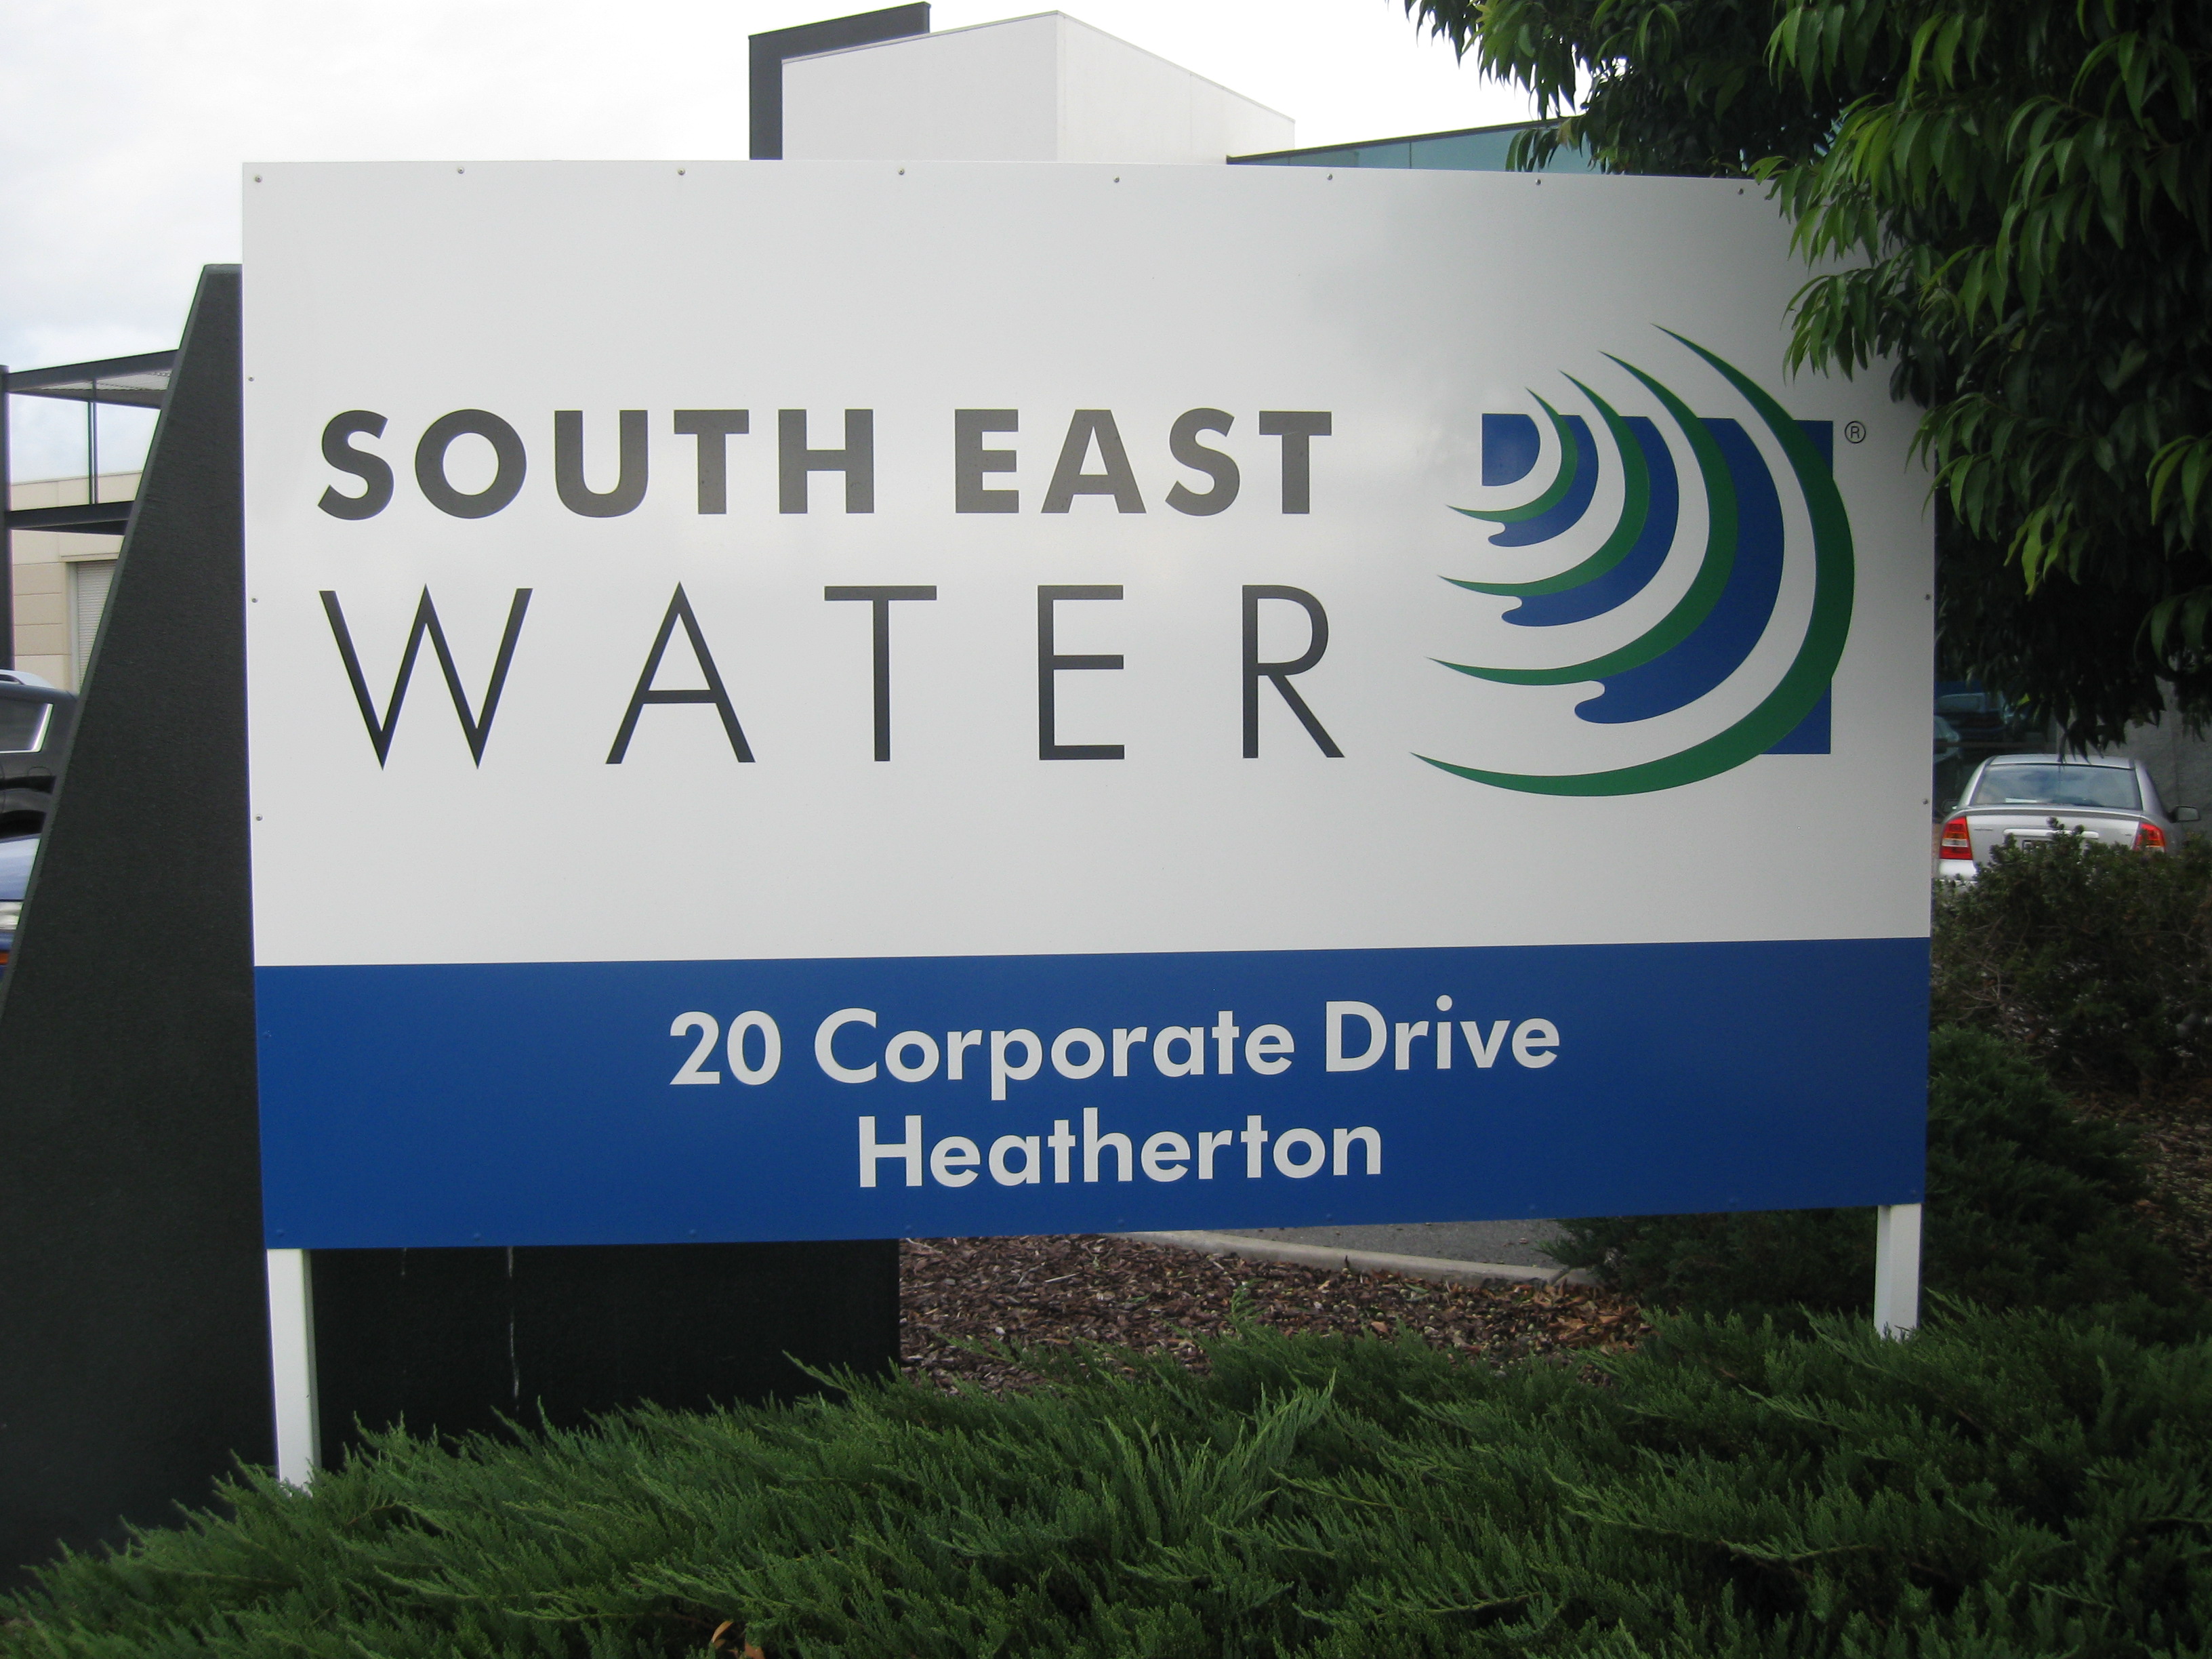 South East Water 13 04 2010 1